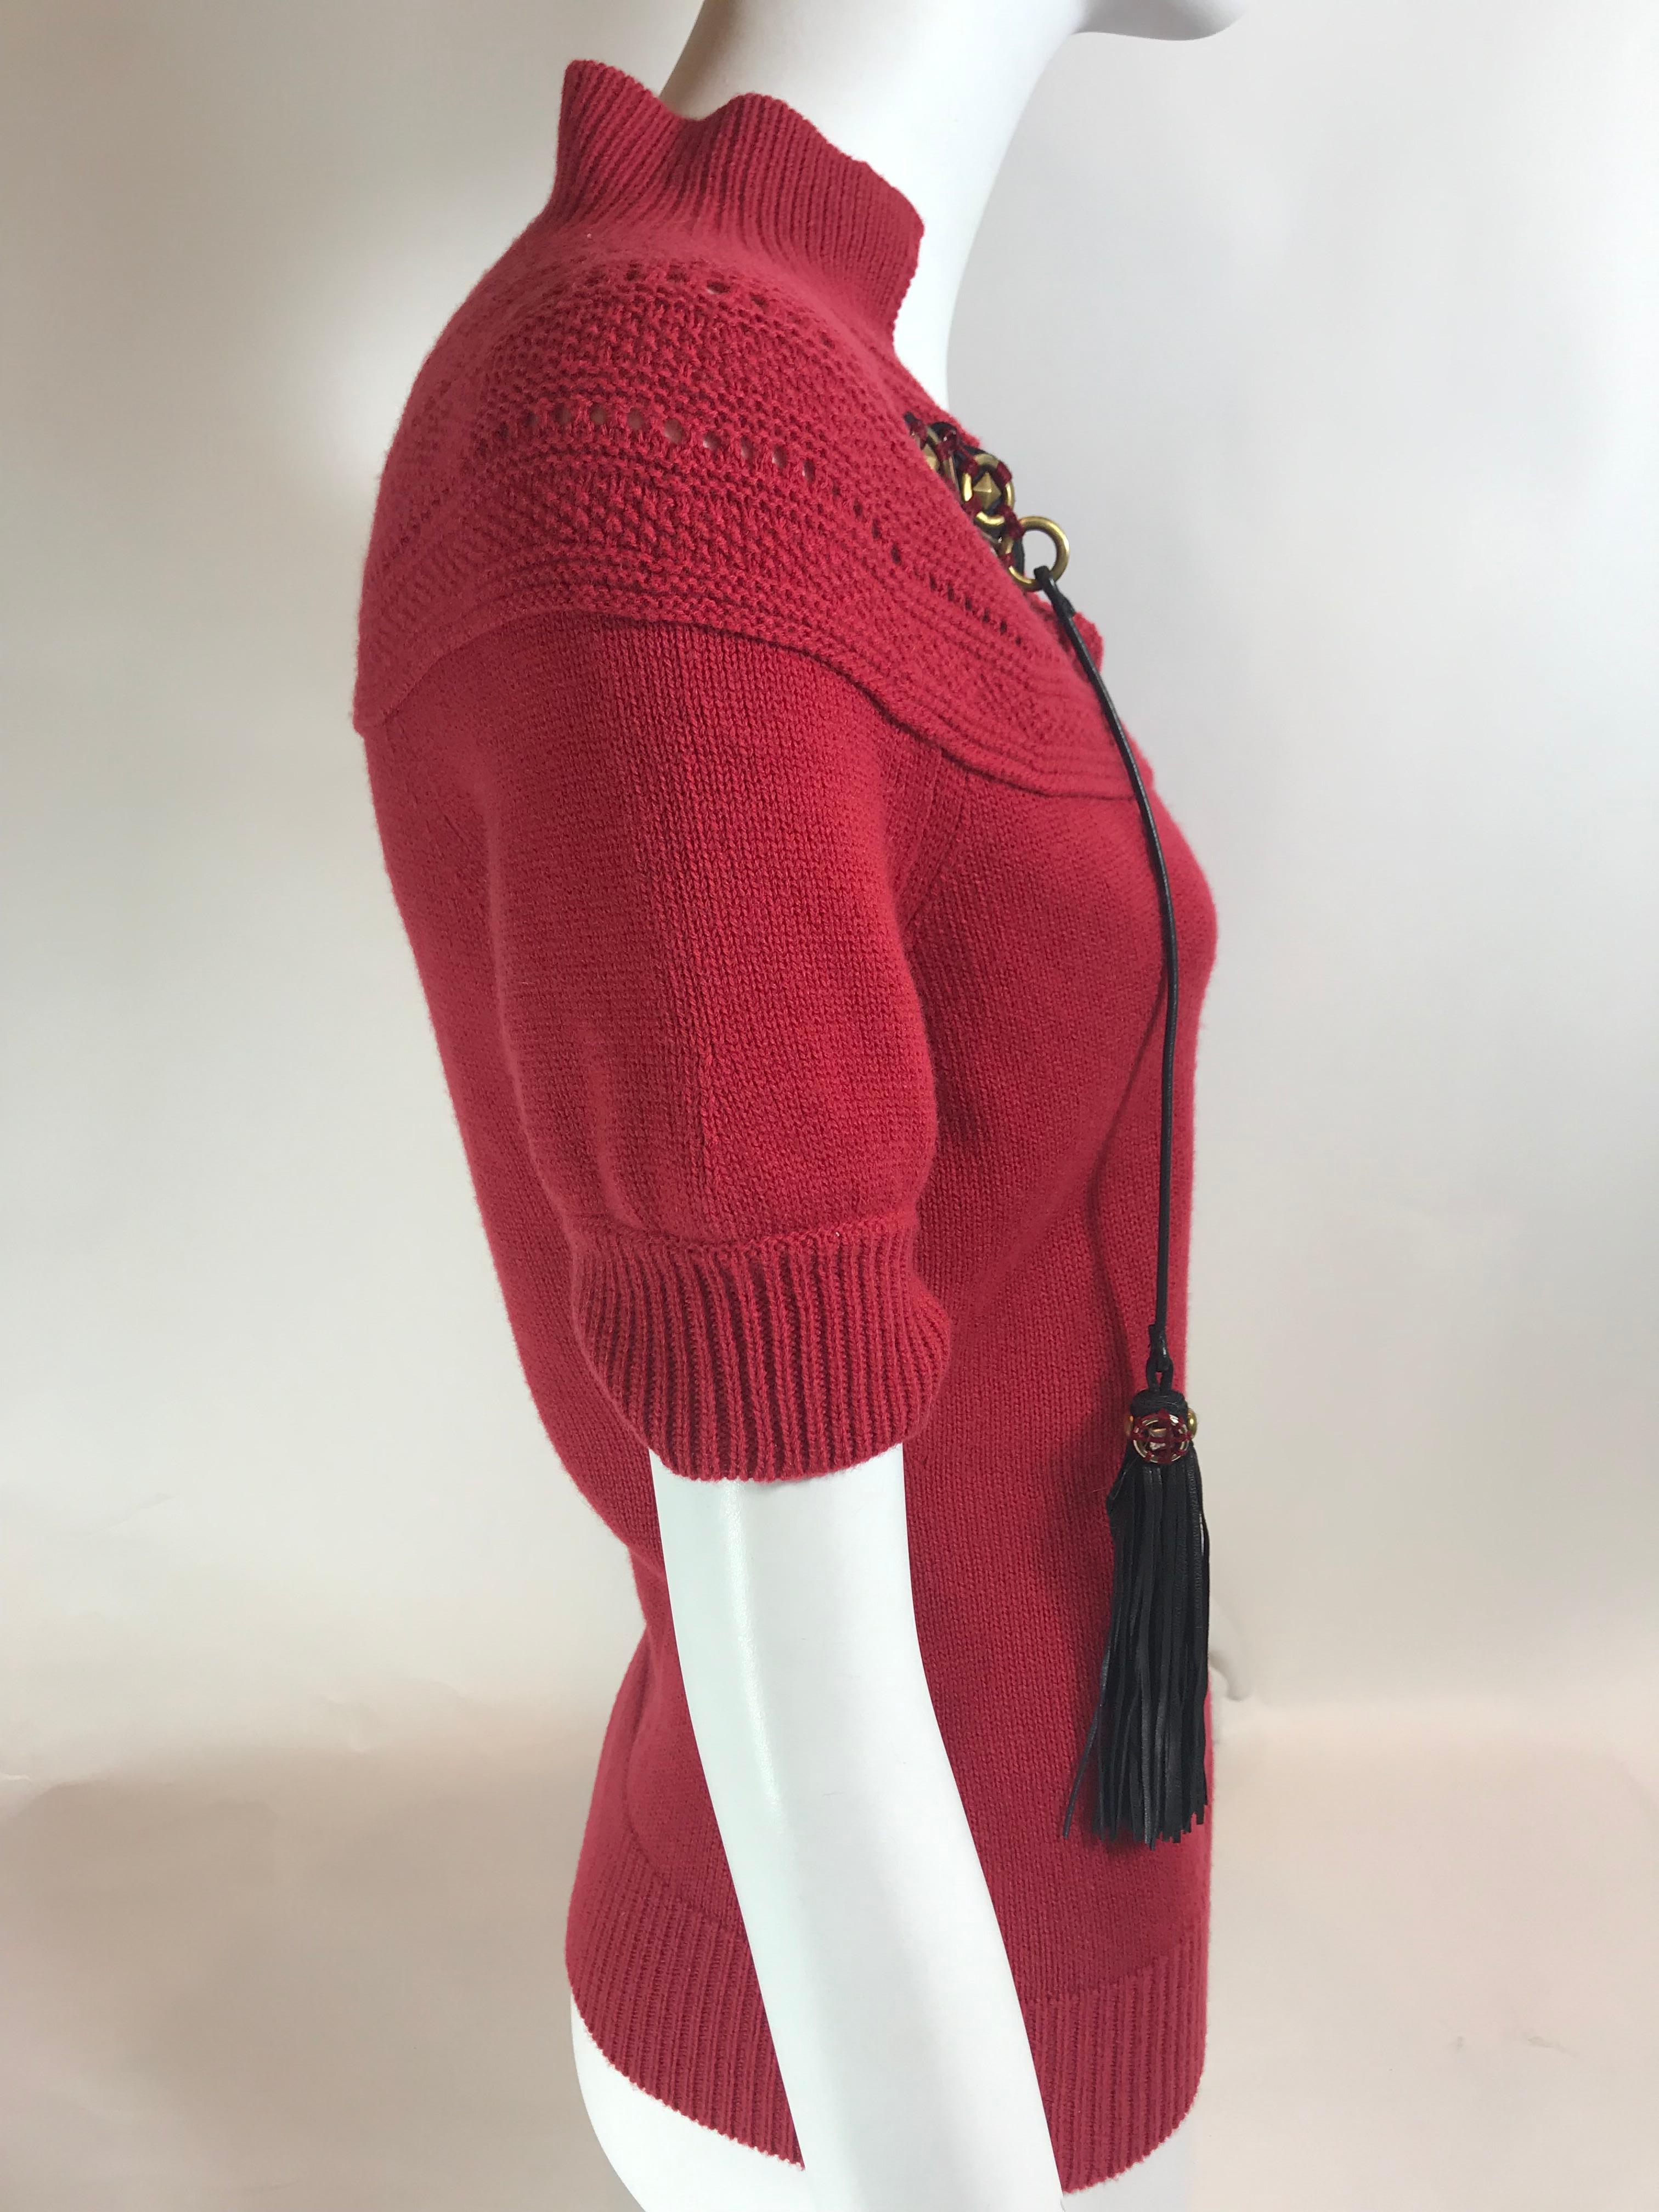 Red wool sweater with pointed collar, embellished tie closure at front featuring tassels. Short sleeves.